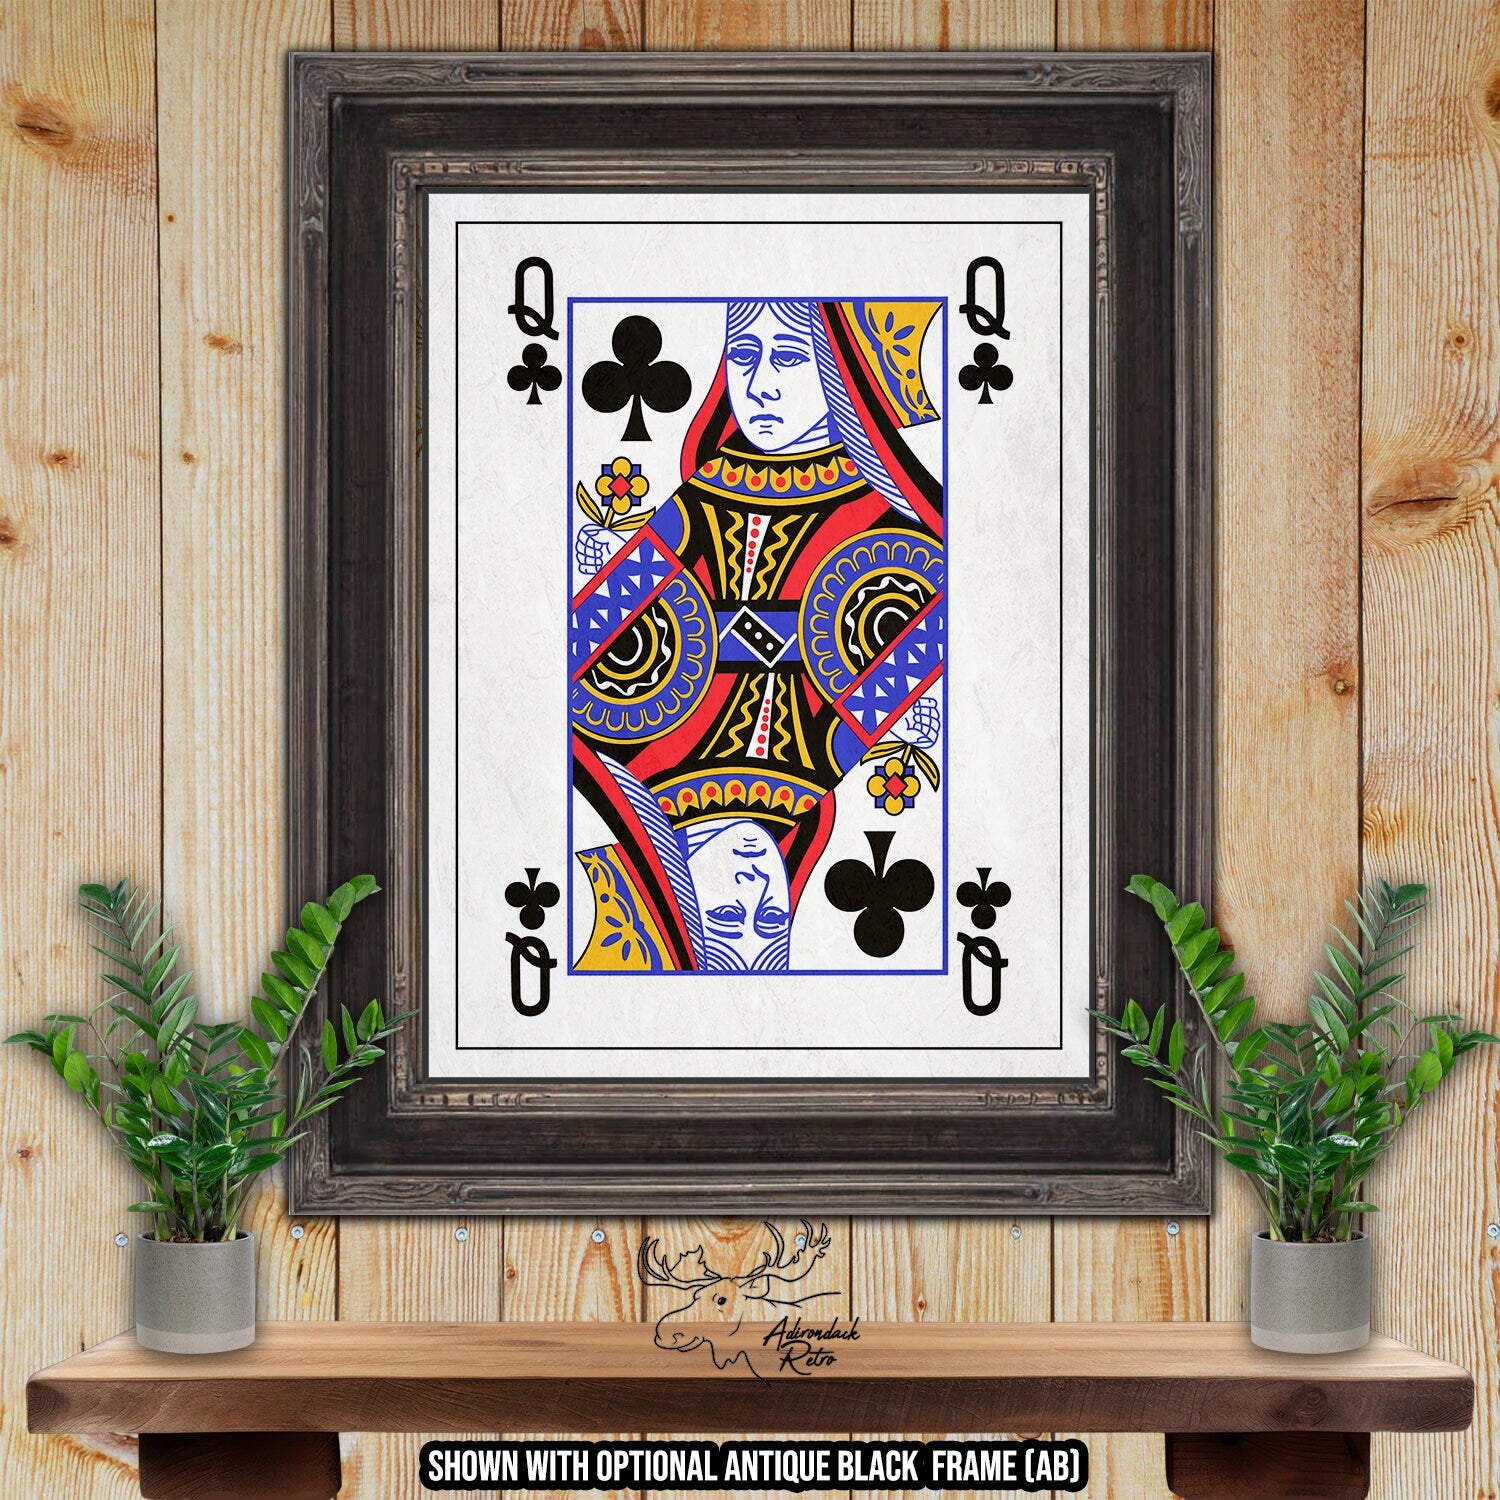 Queen of Clubs Fine Art Poker Print - Playing Card Poster at Adirondack Retro